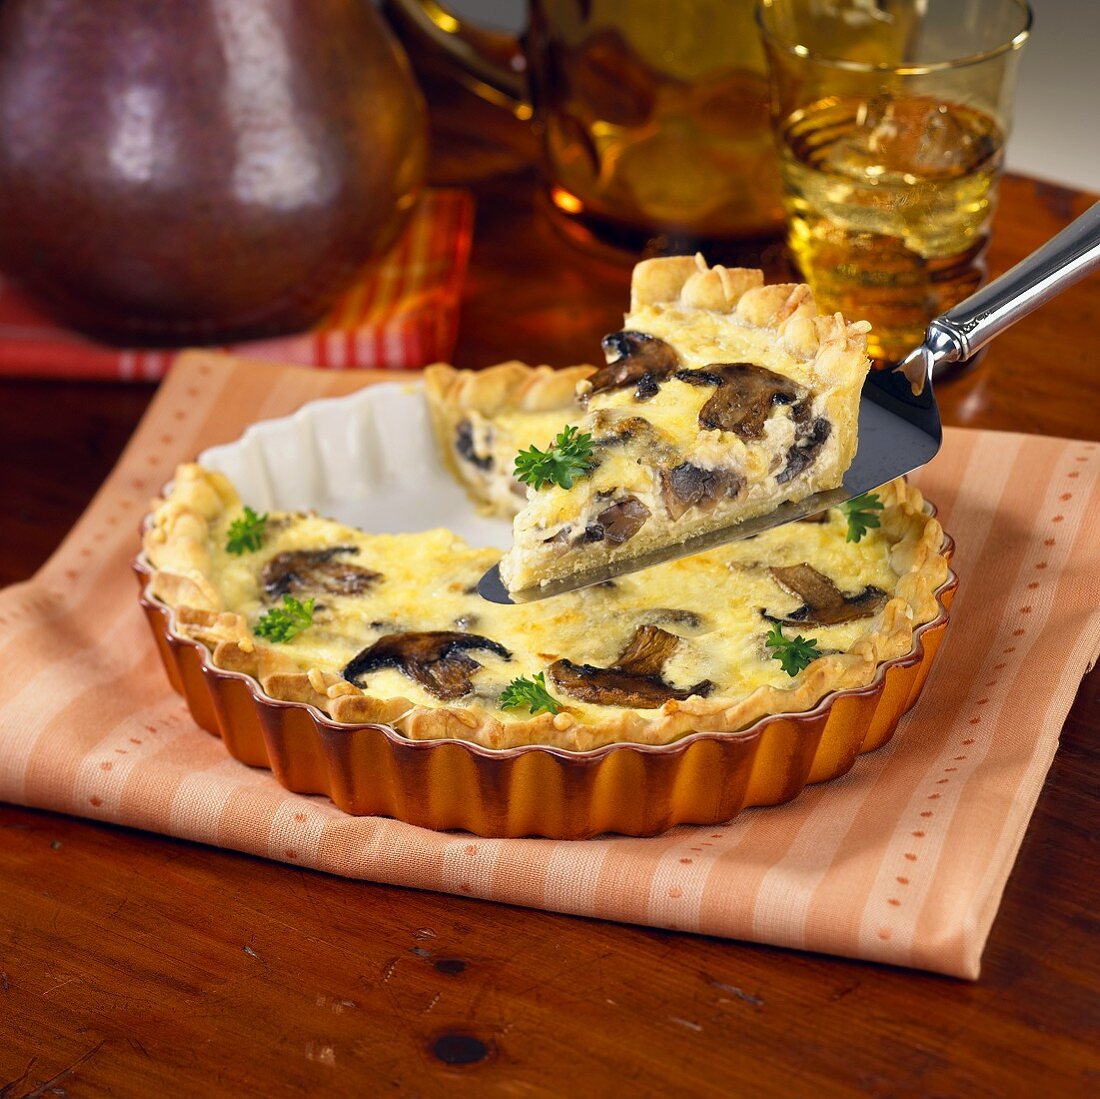 A Slice of Mushroom Quiche Being Lifted from the Pan on a Spatula